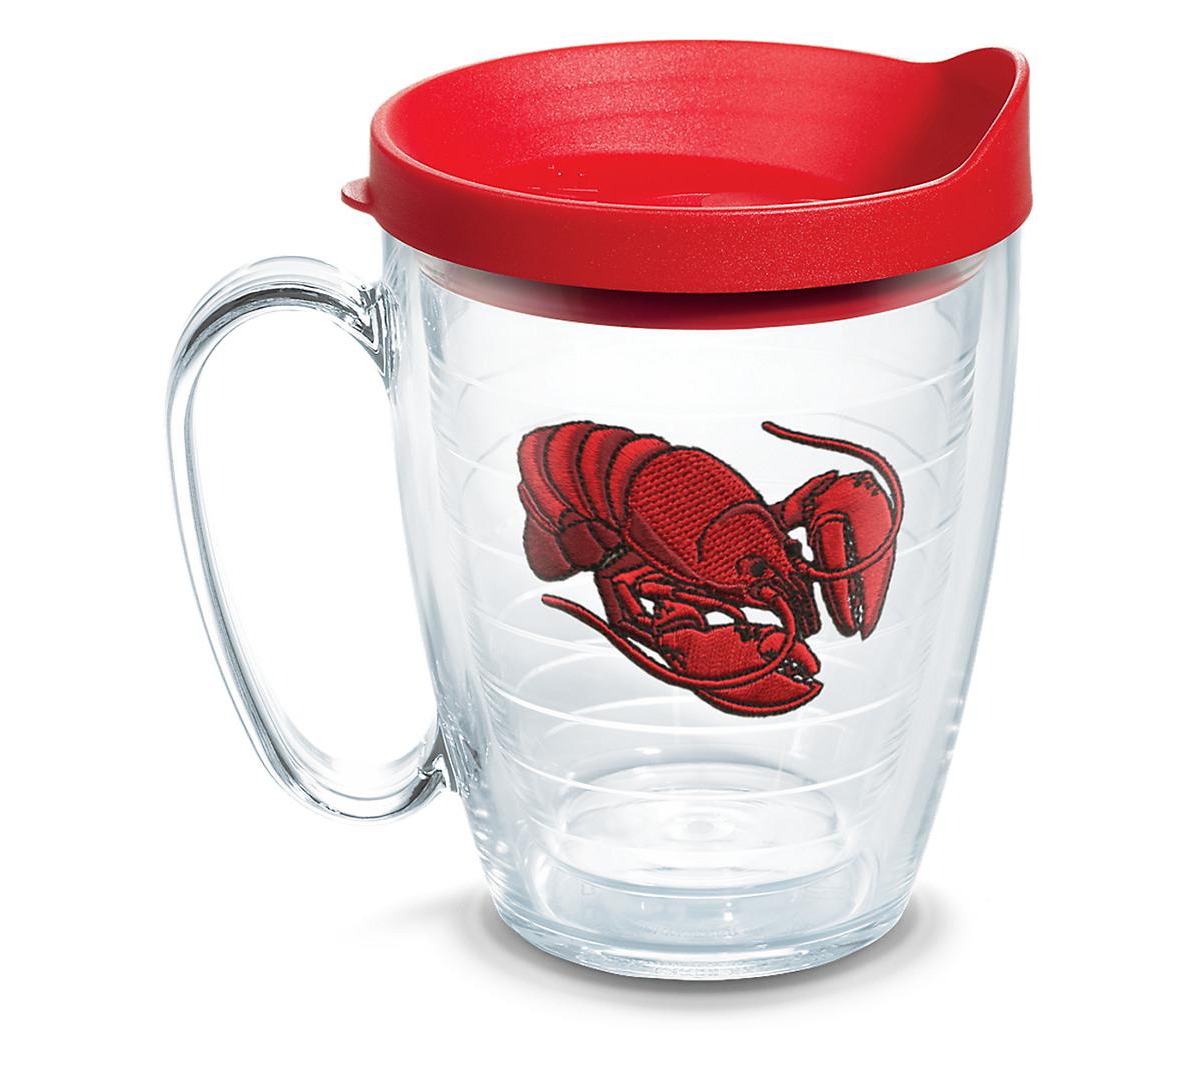 Tervis Tumbler Tervis Lobster Made In Usa Double Walled Insulated Tumbler Travel Cup Keeps Drinks Cold & Hot, 16oz In Open Miscellaneous